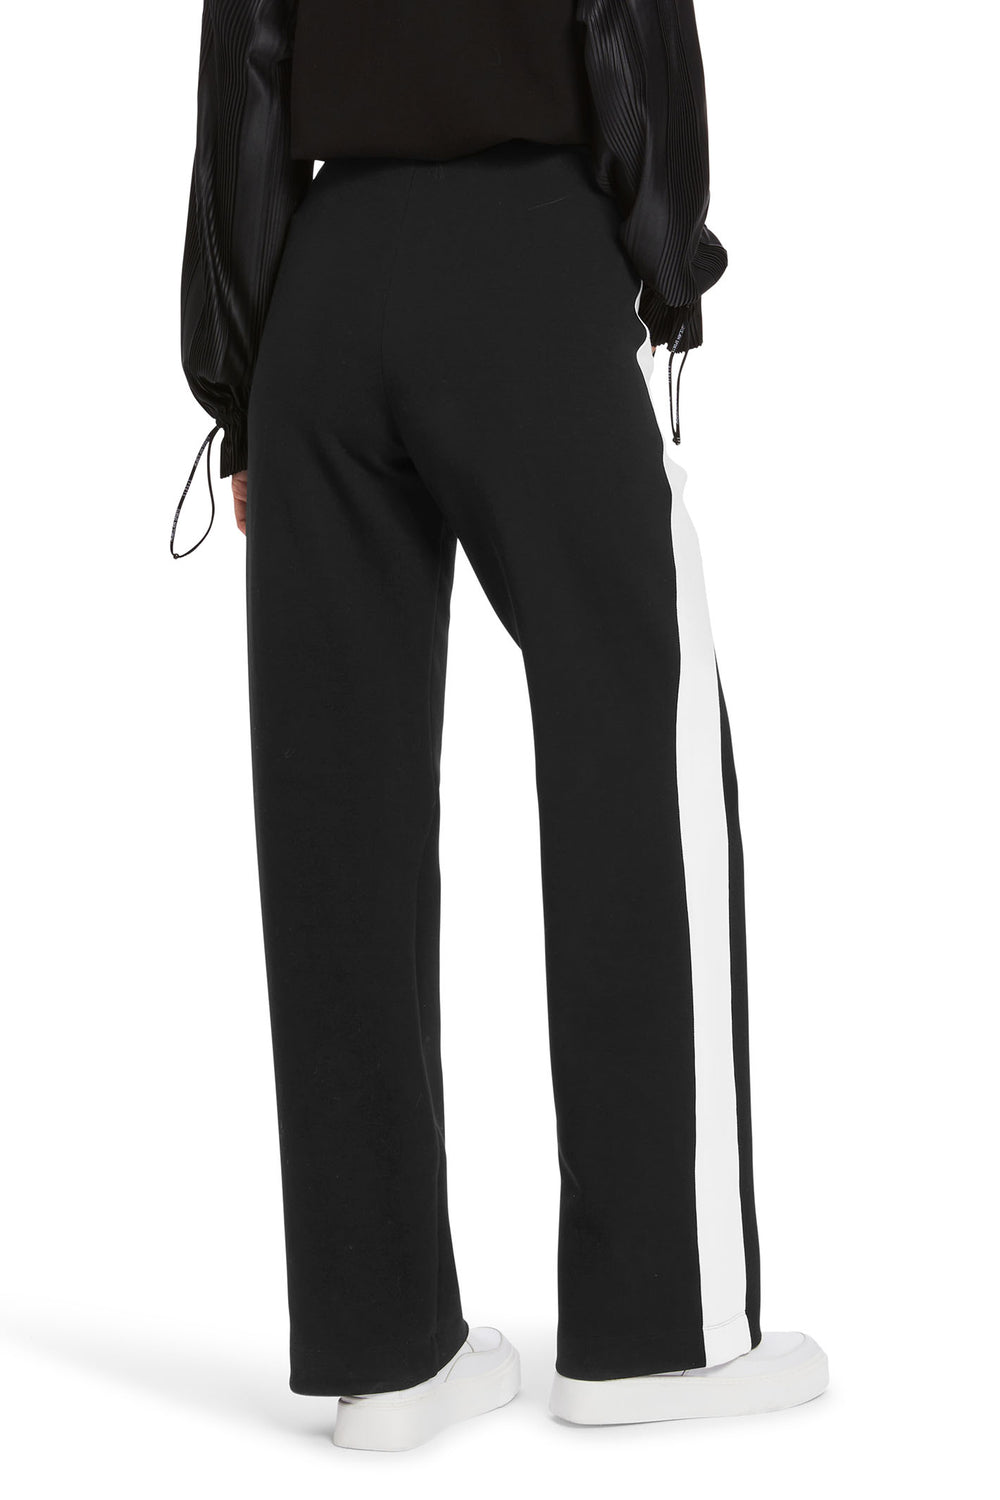 Marc Cain Sports Pull-On Trousers Black With Side Stripe XS 81.38 J09 900 - Olivia Grace Fashion